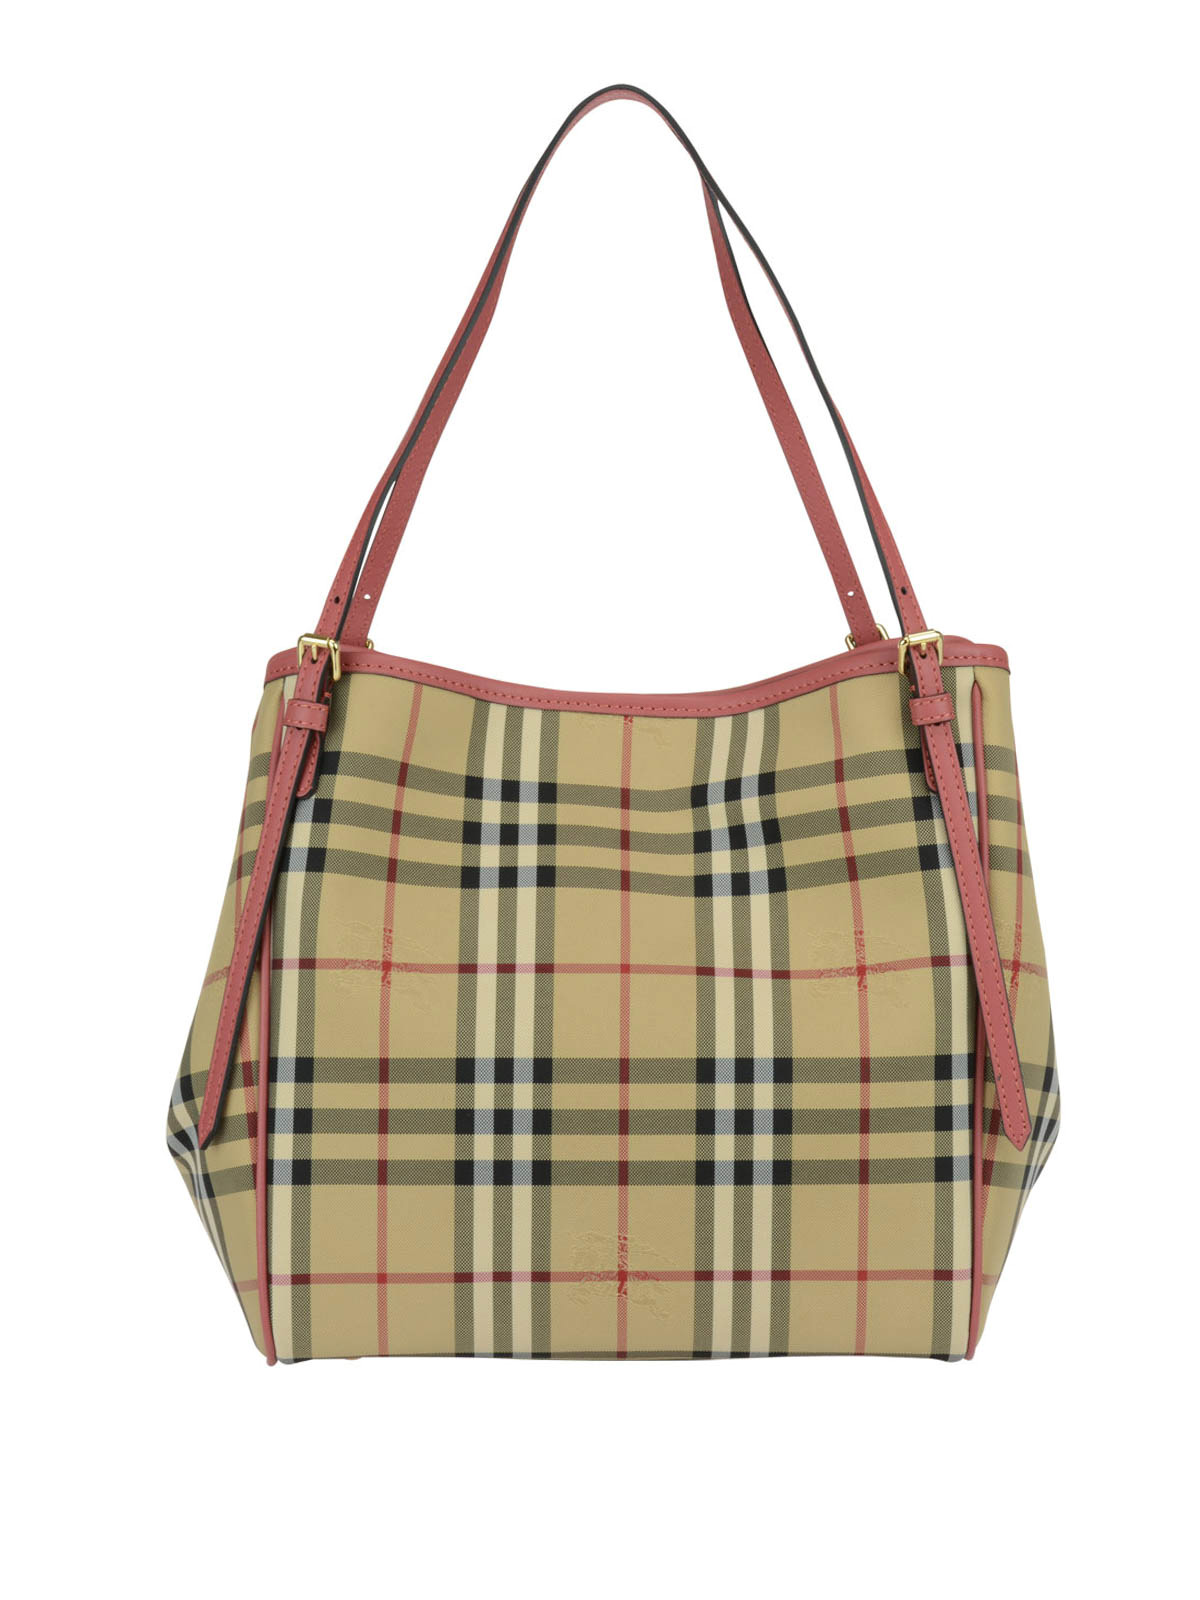 Burberry - The Canter small tote 